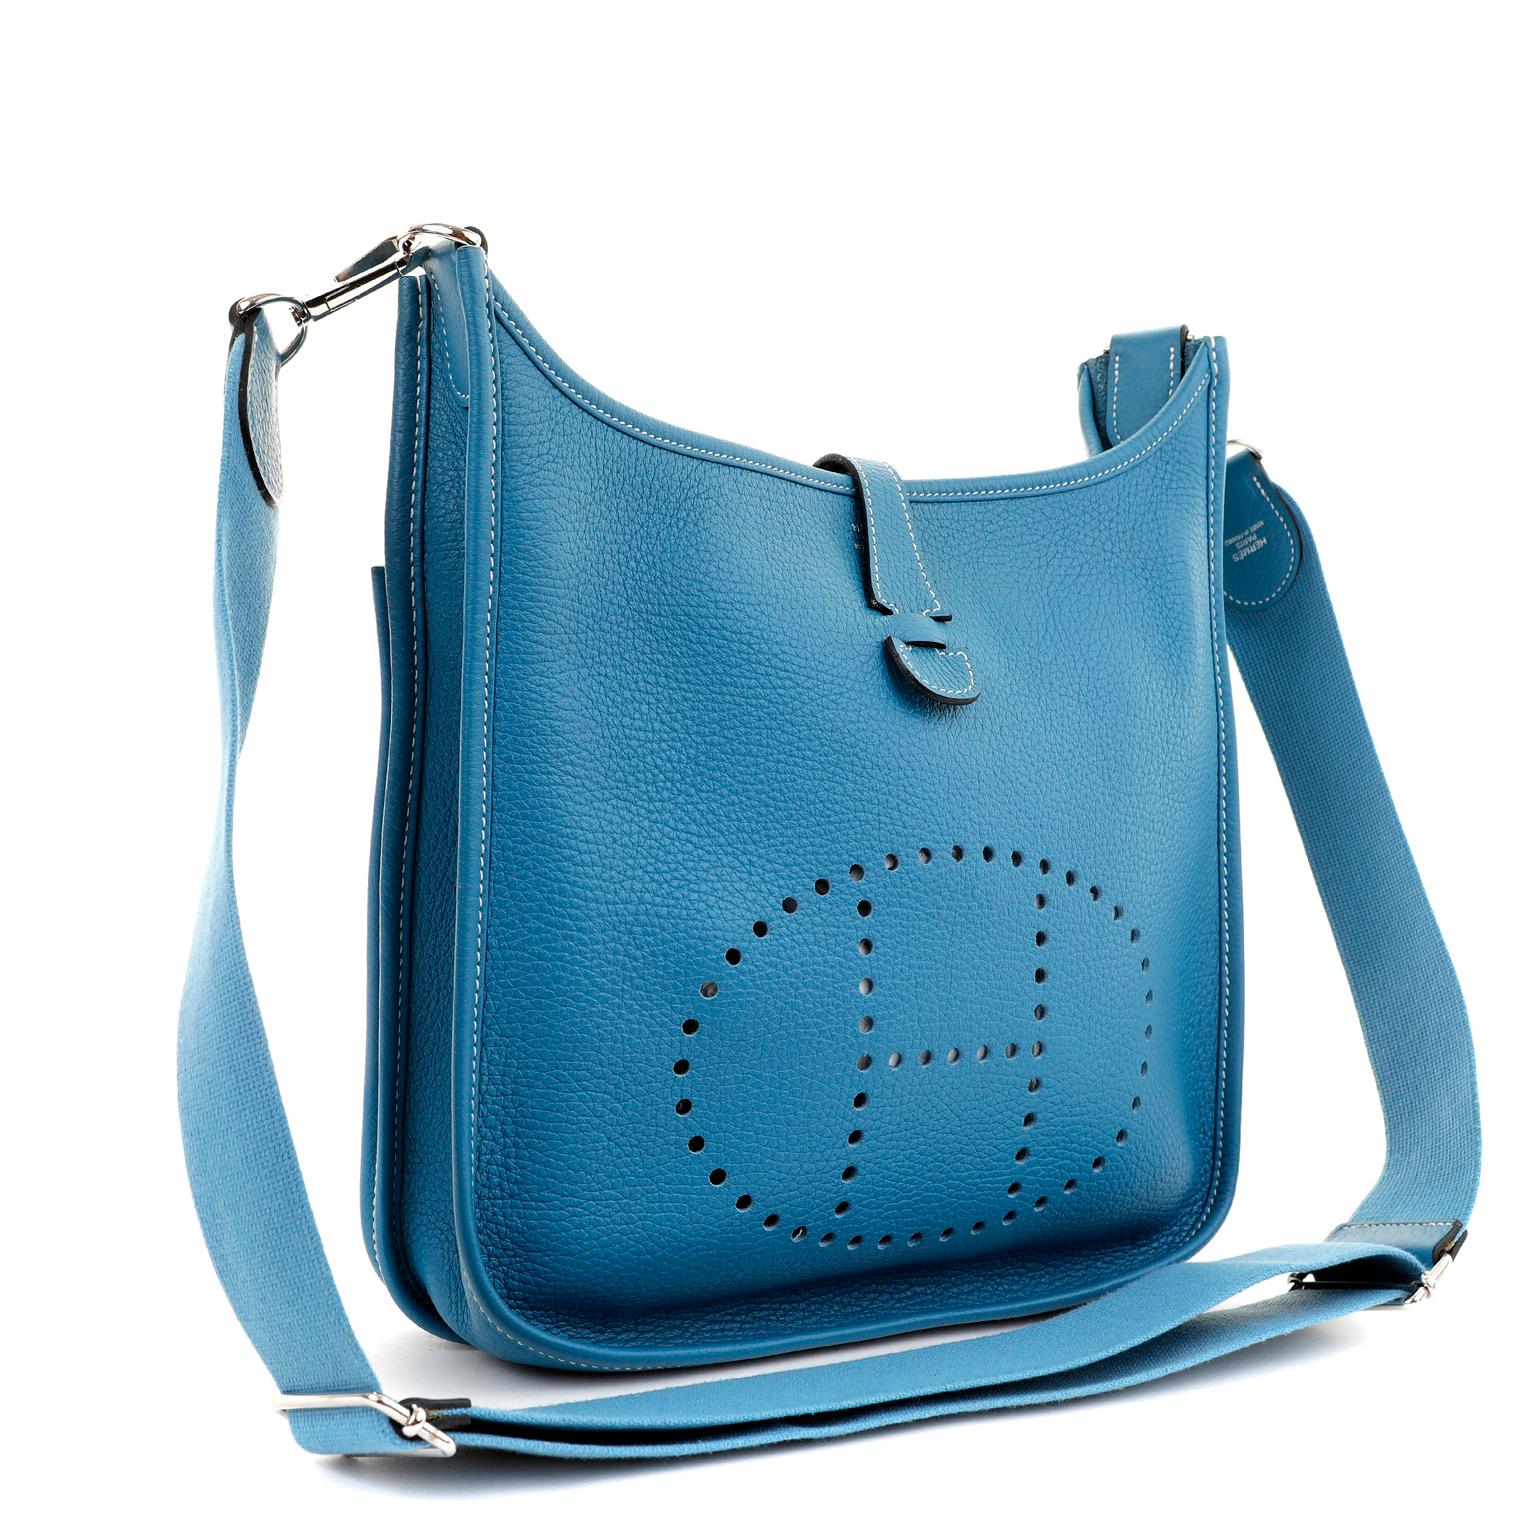 This authentic Hermès Blue Jean Clemence Evelyne GM is in excellent condition. Extremely sought after, the Evelyne is an understated day bag that is stylish and practical. 

The Evelyne silhouette is inspired by an equestrian groom’s tool bag, with